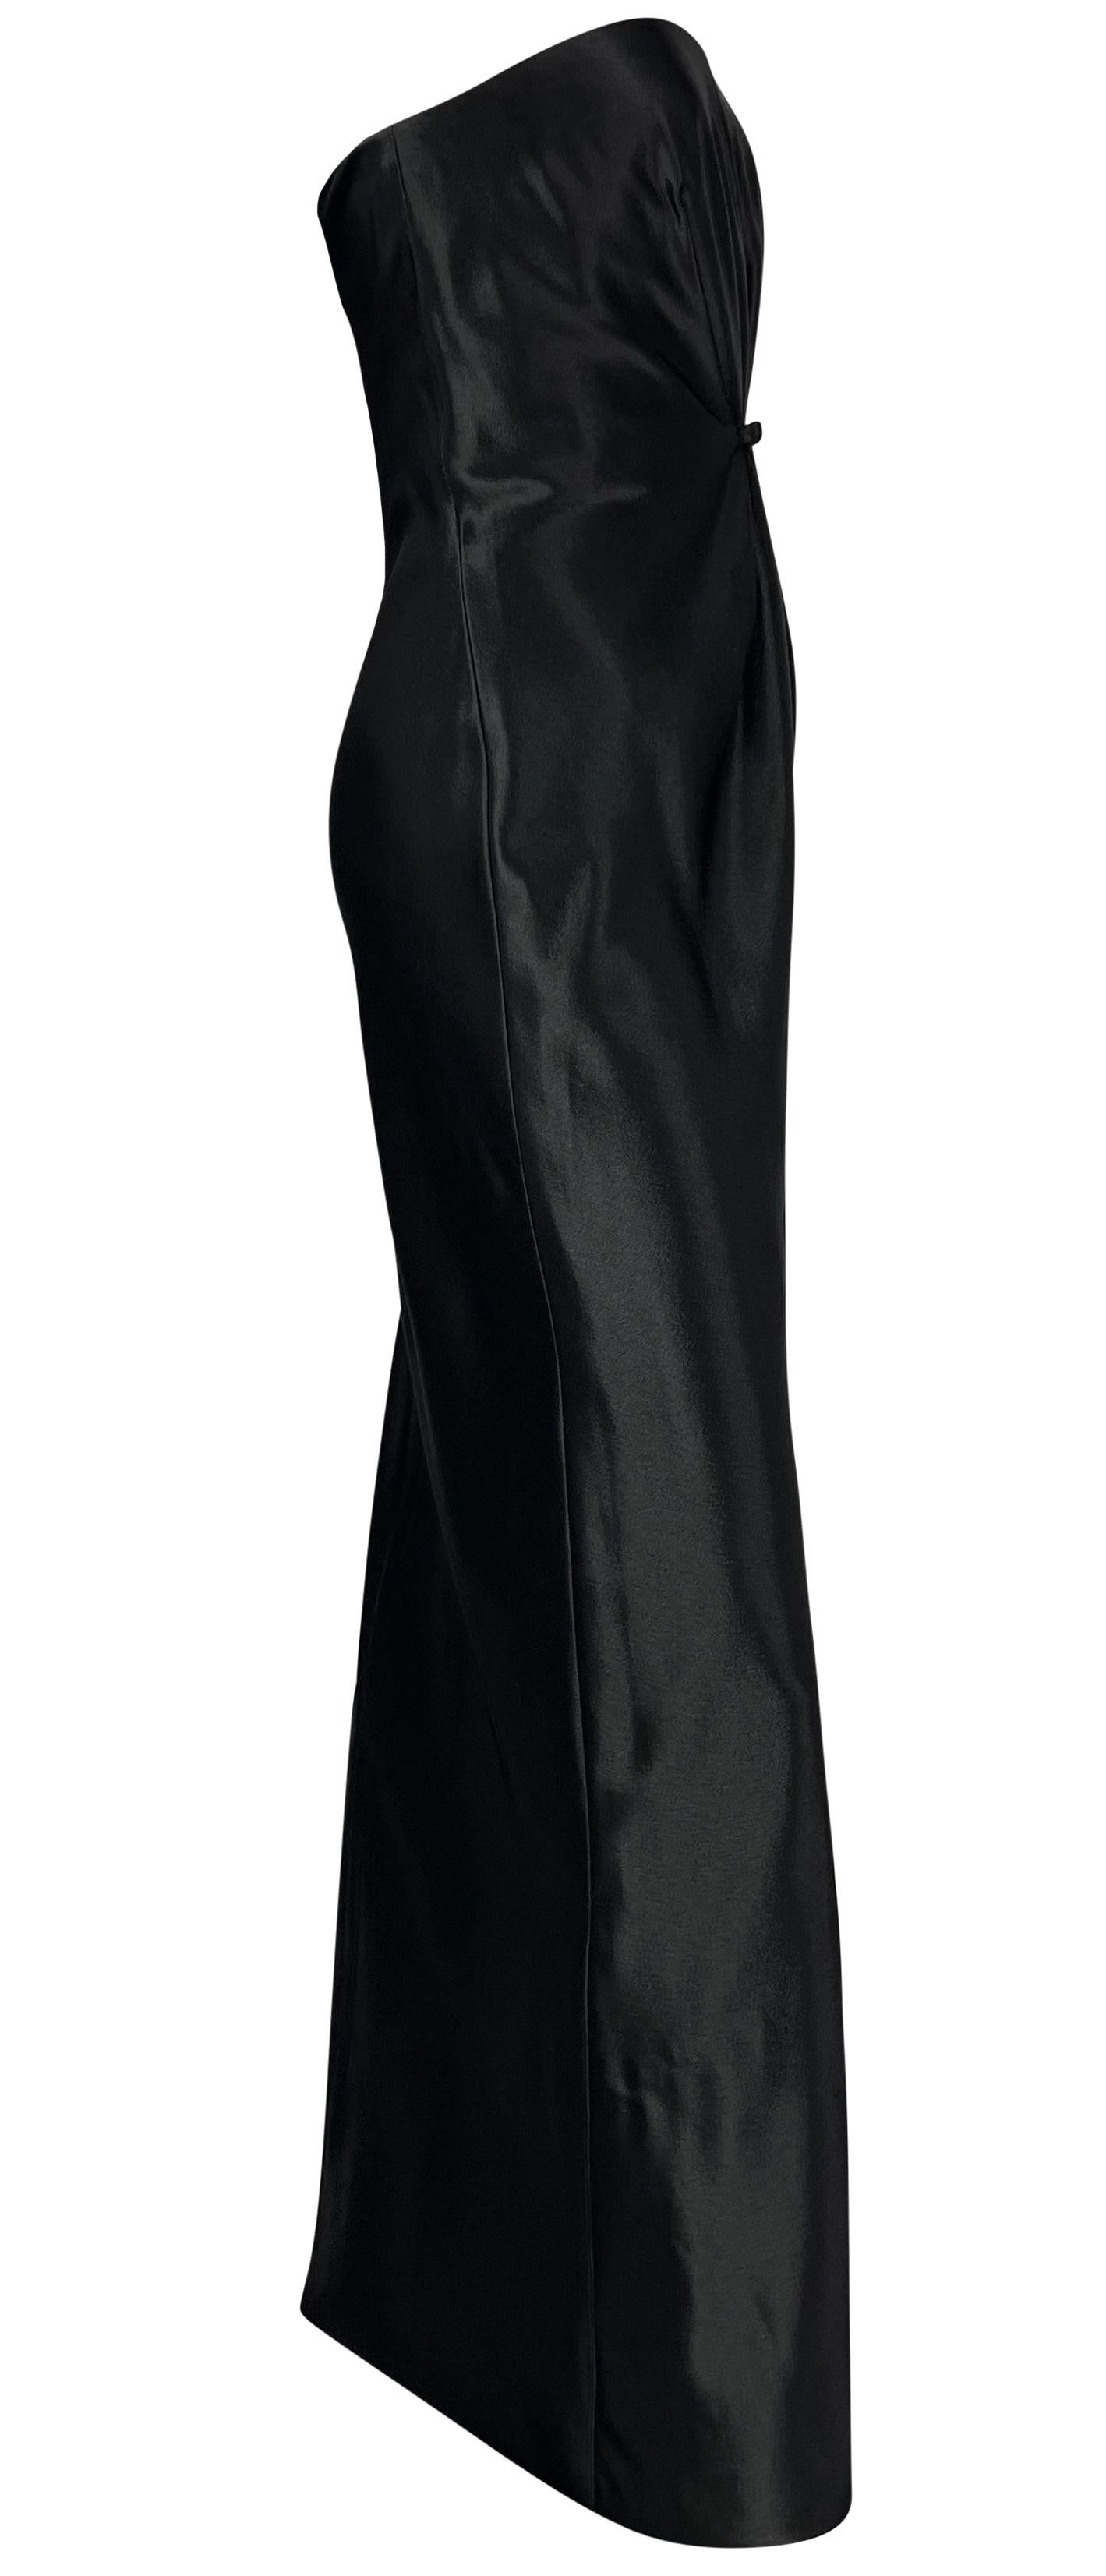 F/W 1997 Gianni Versace Strapless Satin Tie-Front Black Gown For Sale 5